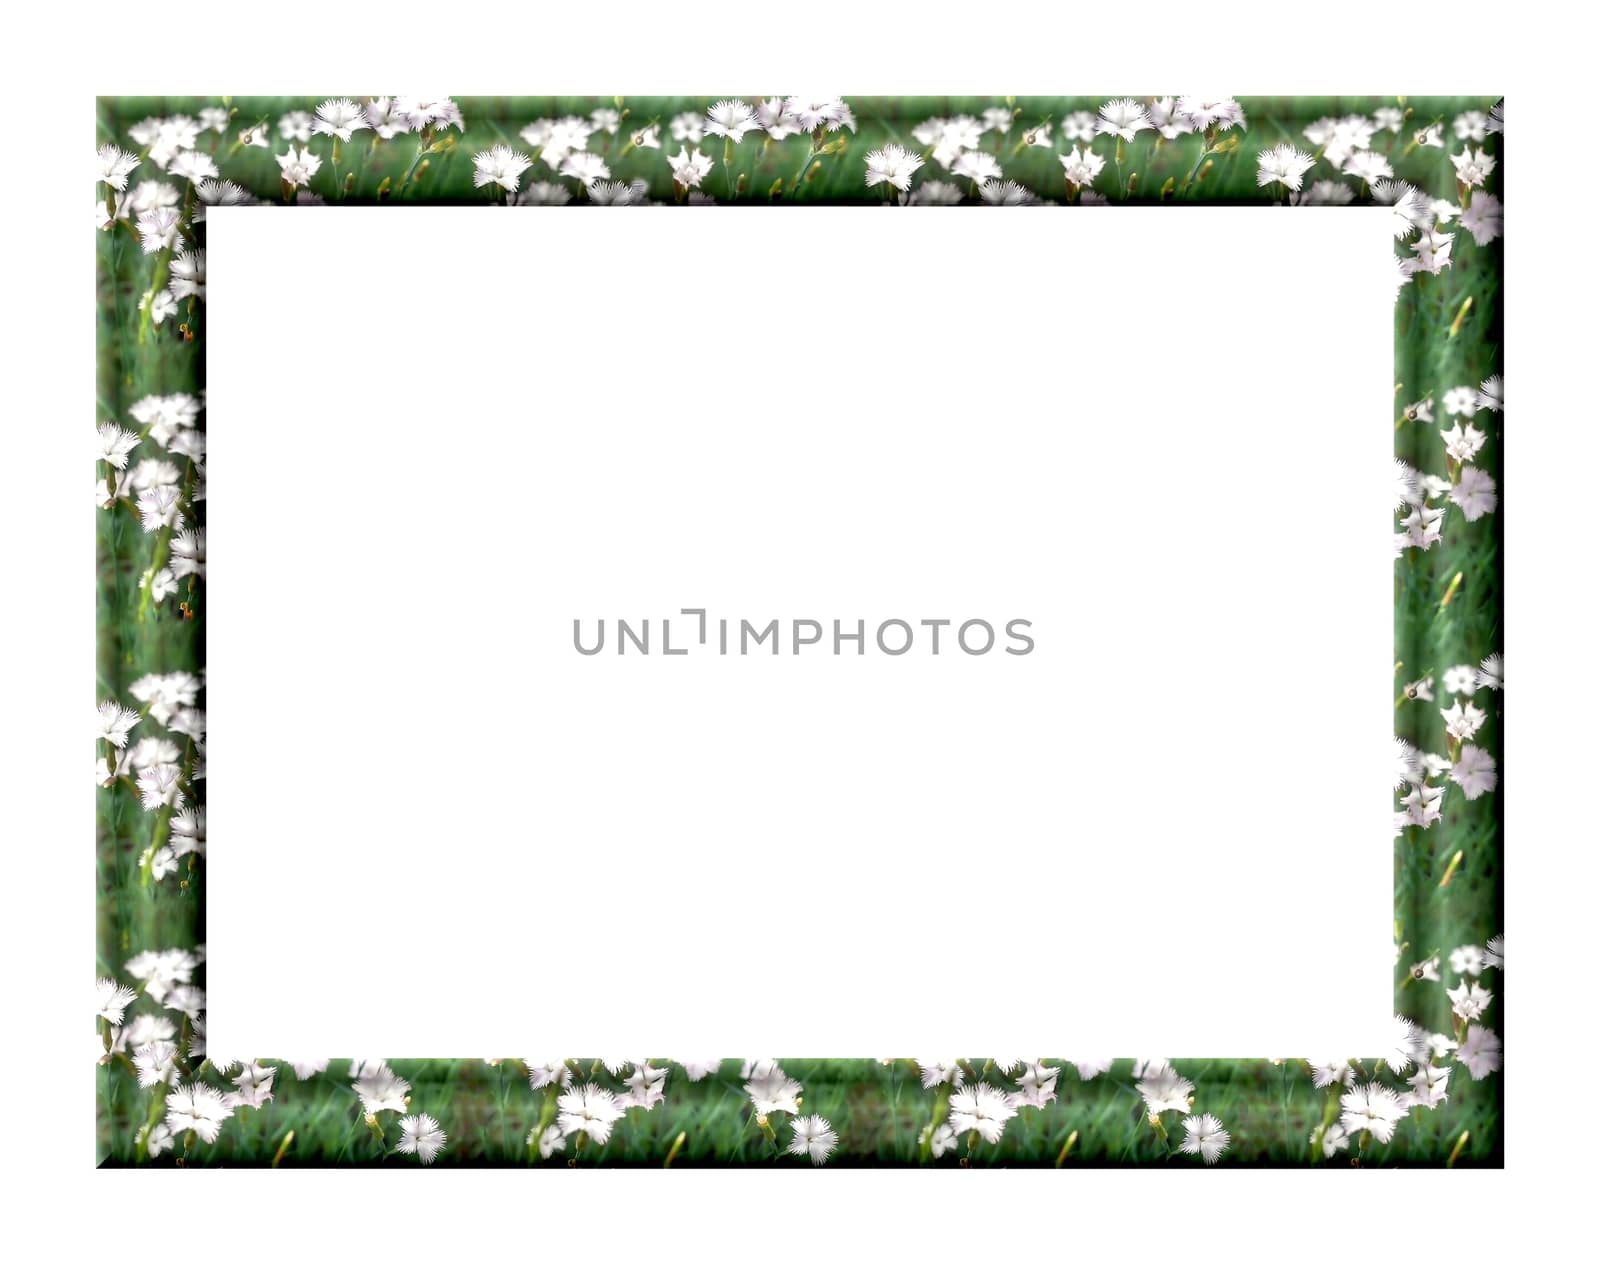 Rectangular blank frame with a picture of meadow flowers and grass isolated on white background